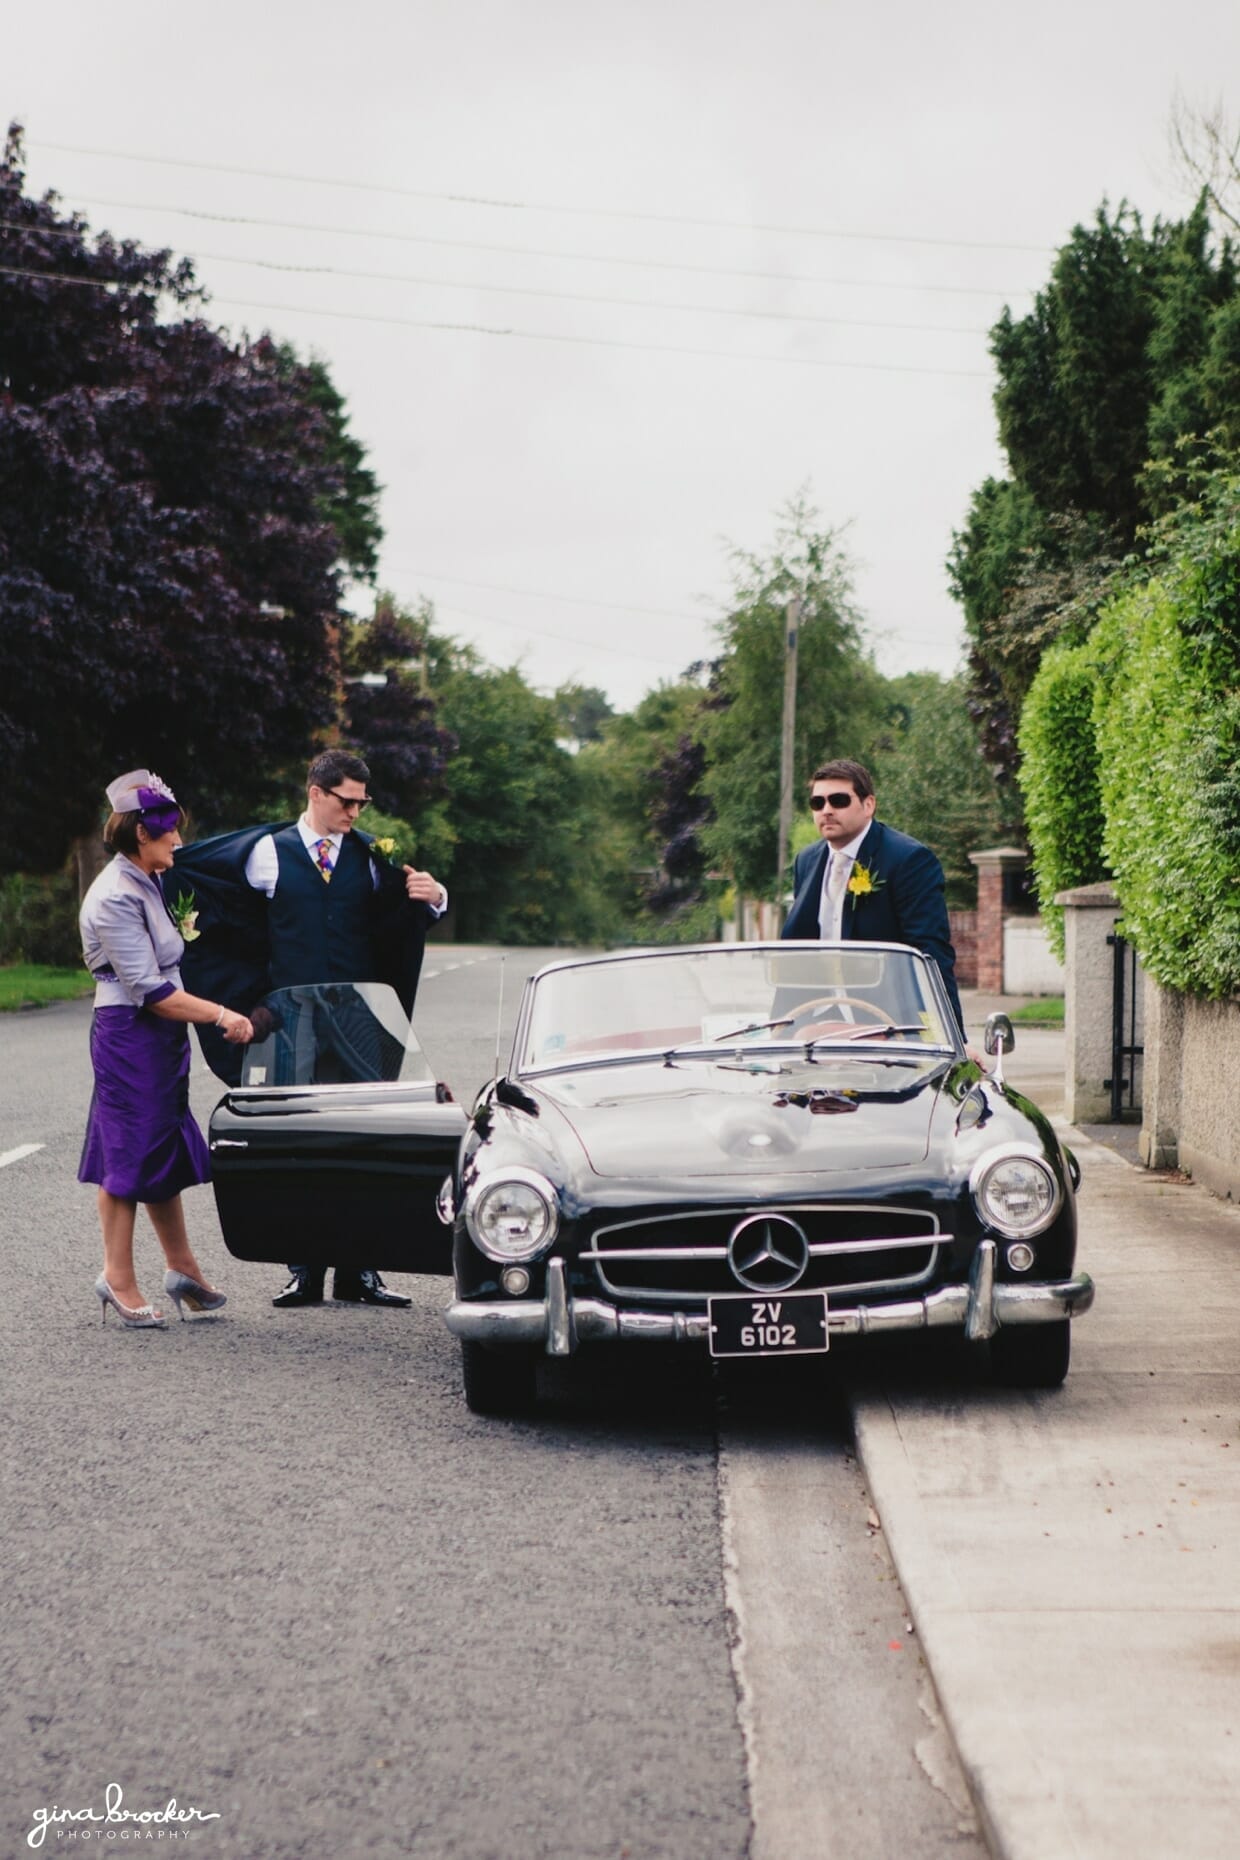 Groom gets into a vintage mercedes benz convertible before leaving for the wedding ceremony